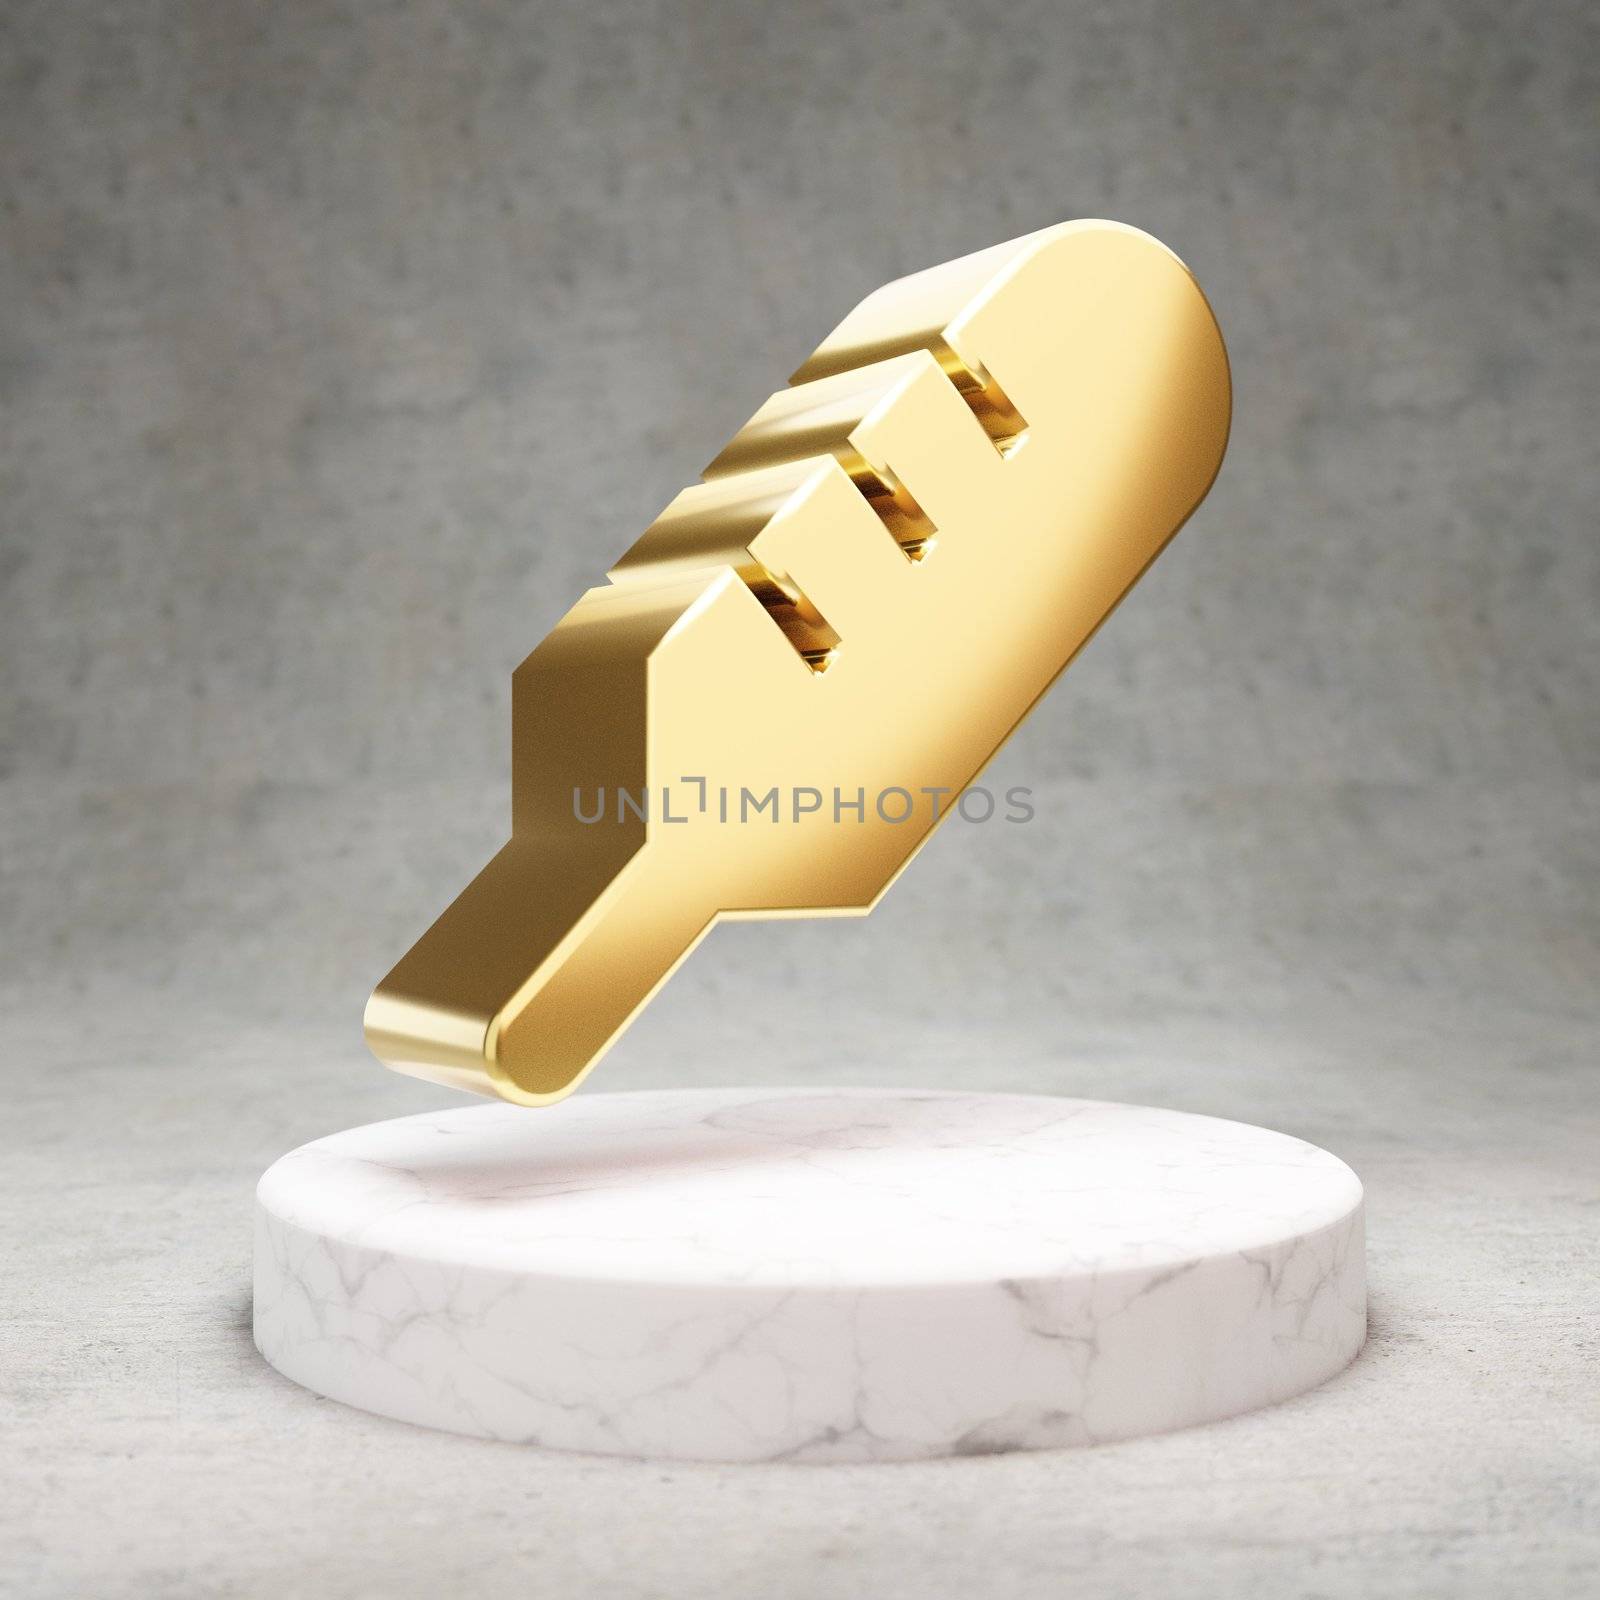 Thermometer icon. Gold glossy Thermometer symbol on white marble podium. Modern icon for website, social media, presentation, design template element. 3D render.